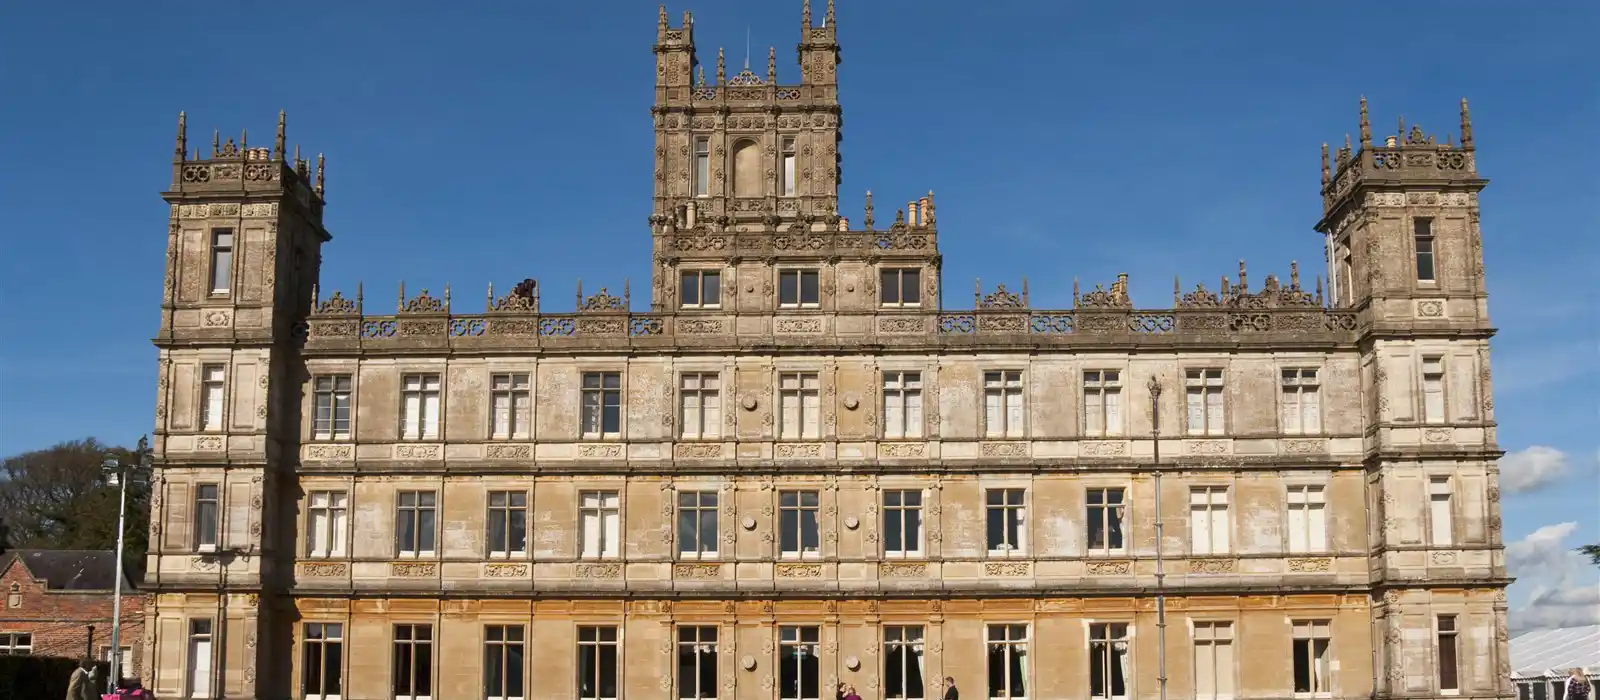 Highclere Castle is the main setting for the Downton Abbey TV Series